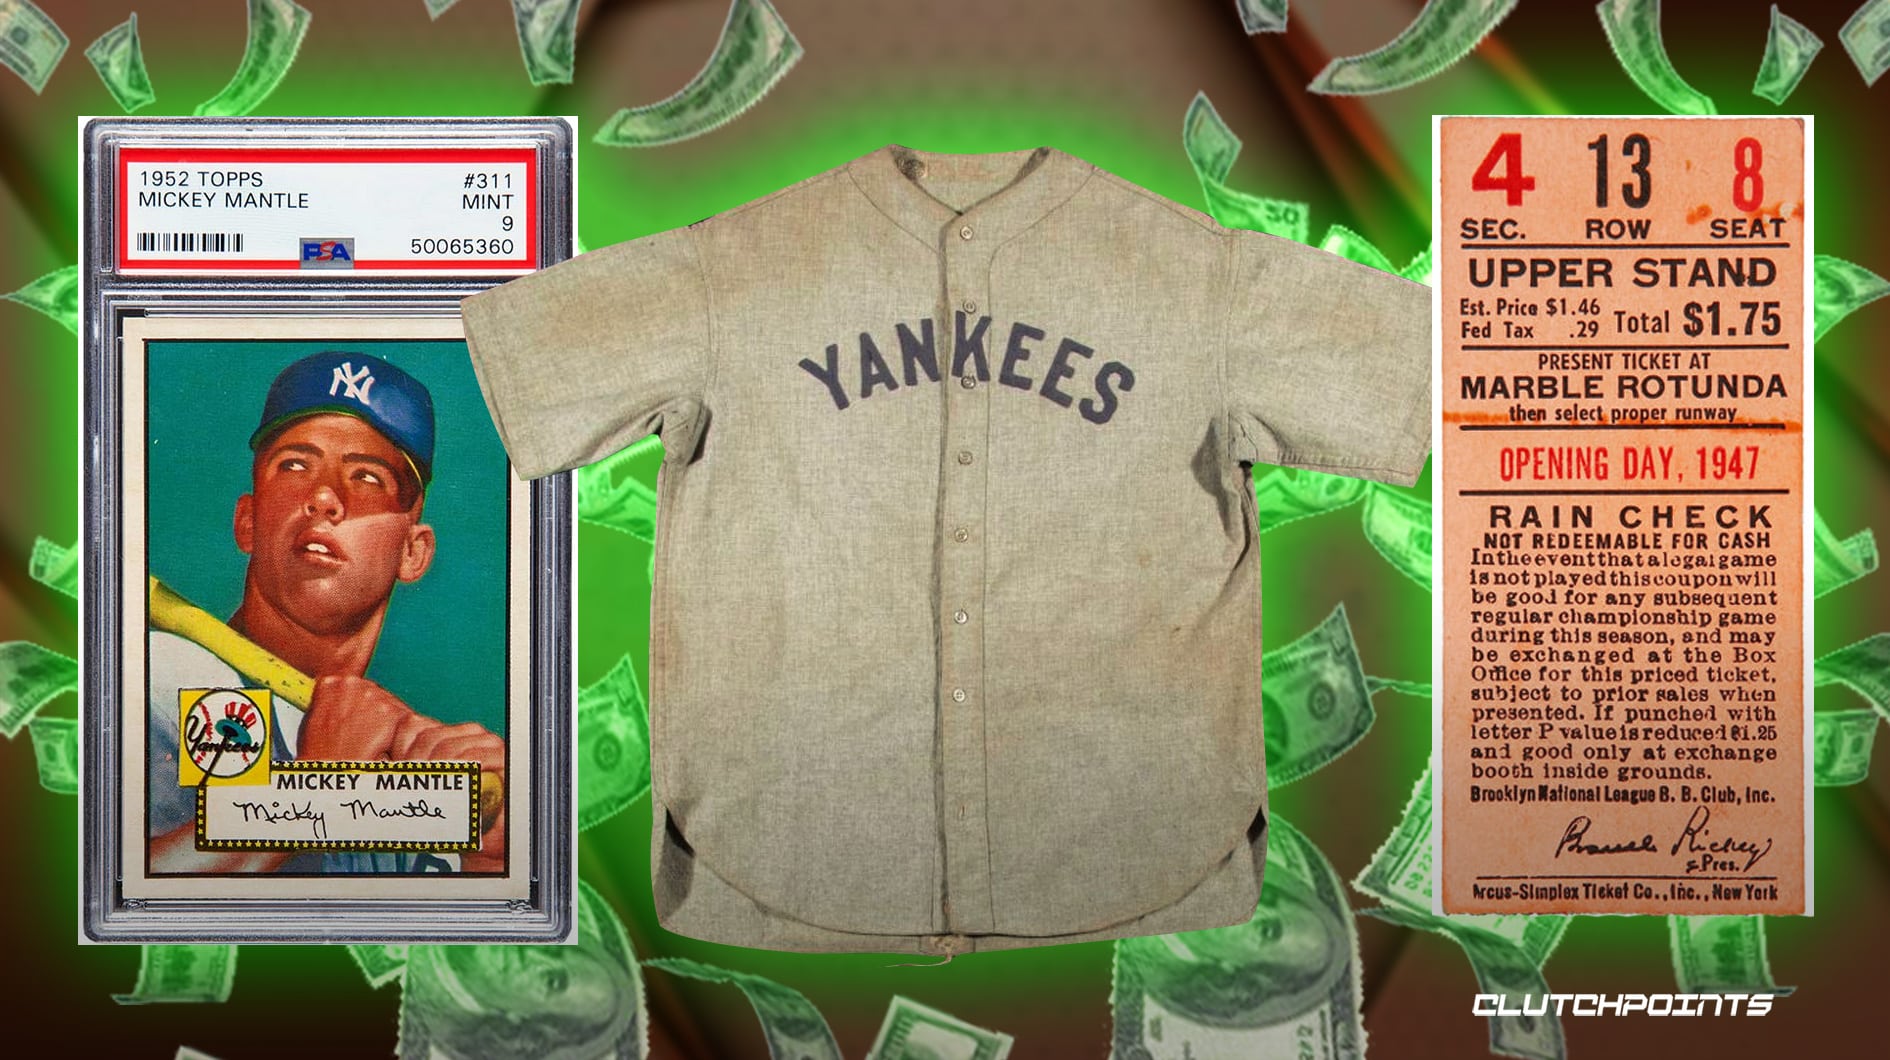 Mickey Mantle may surpass Babe Ruth for most expensive baseball